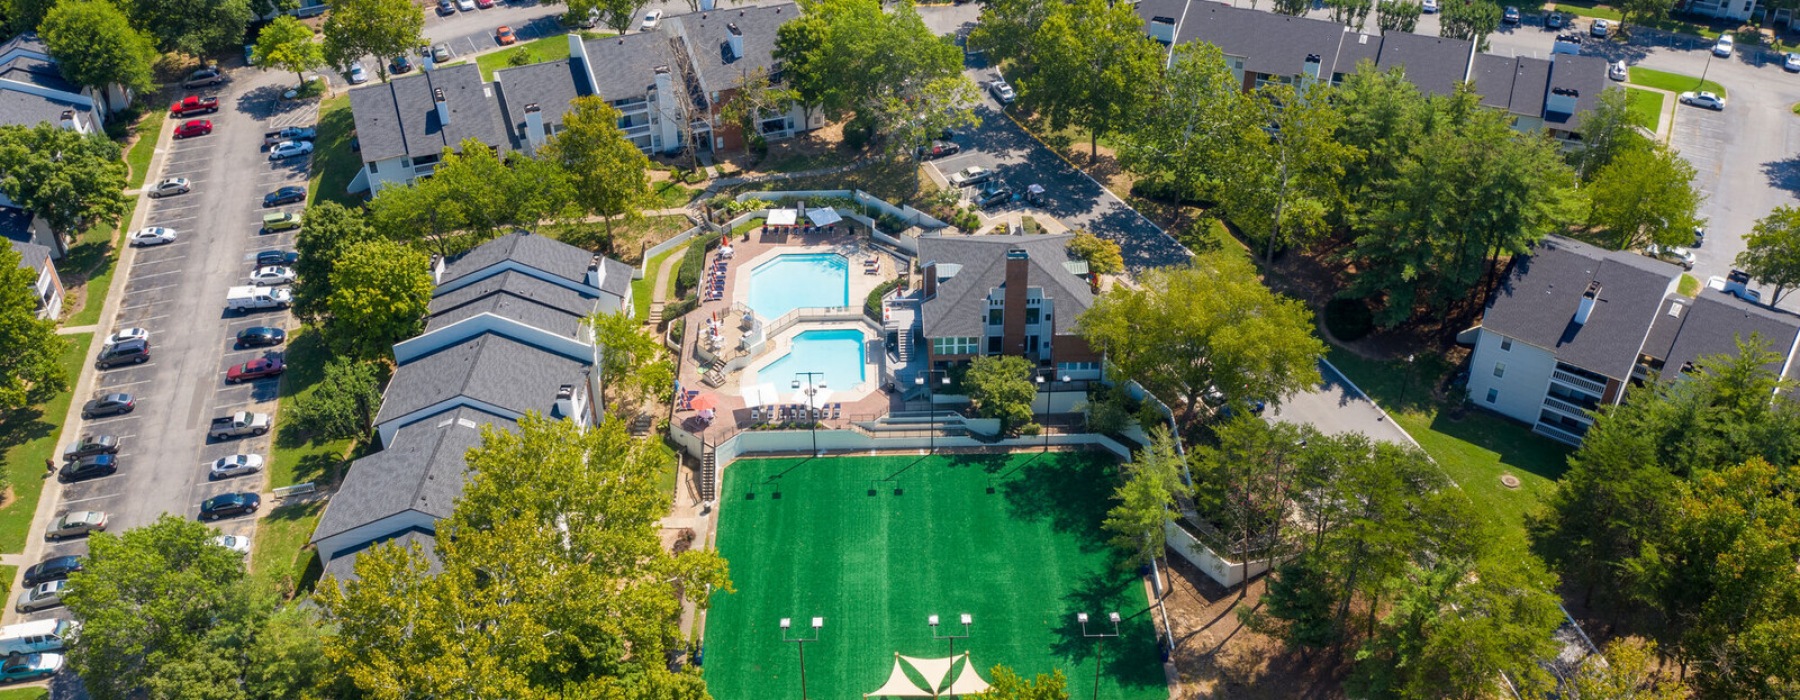 A drone view of the pool and buildings at Lyric on Bell Apartments in Nashville, Tennessee